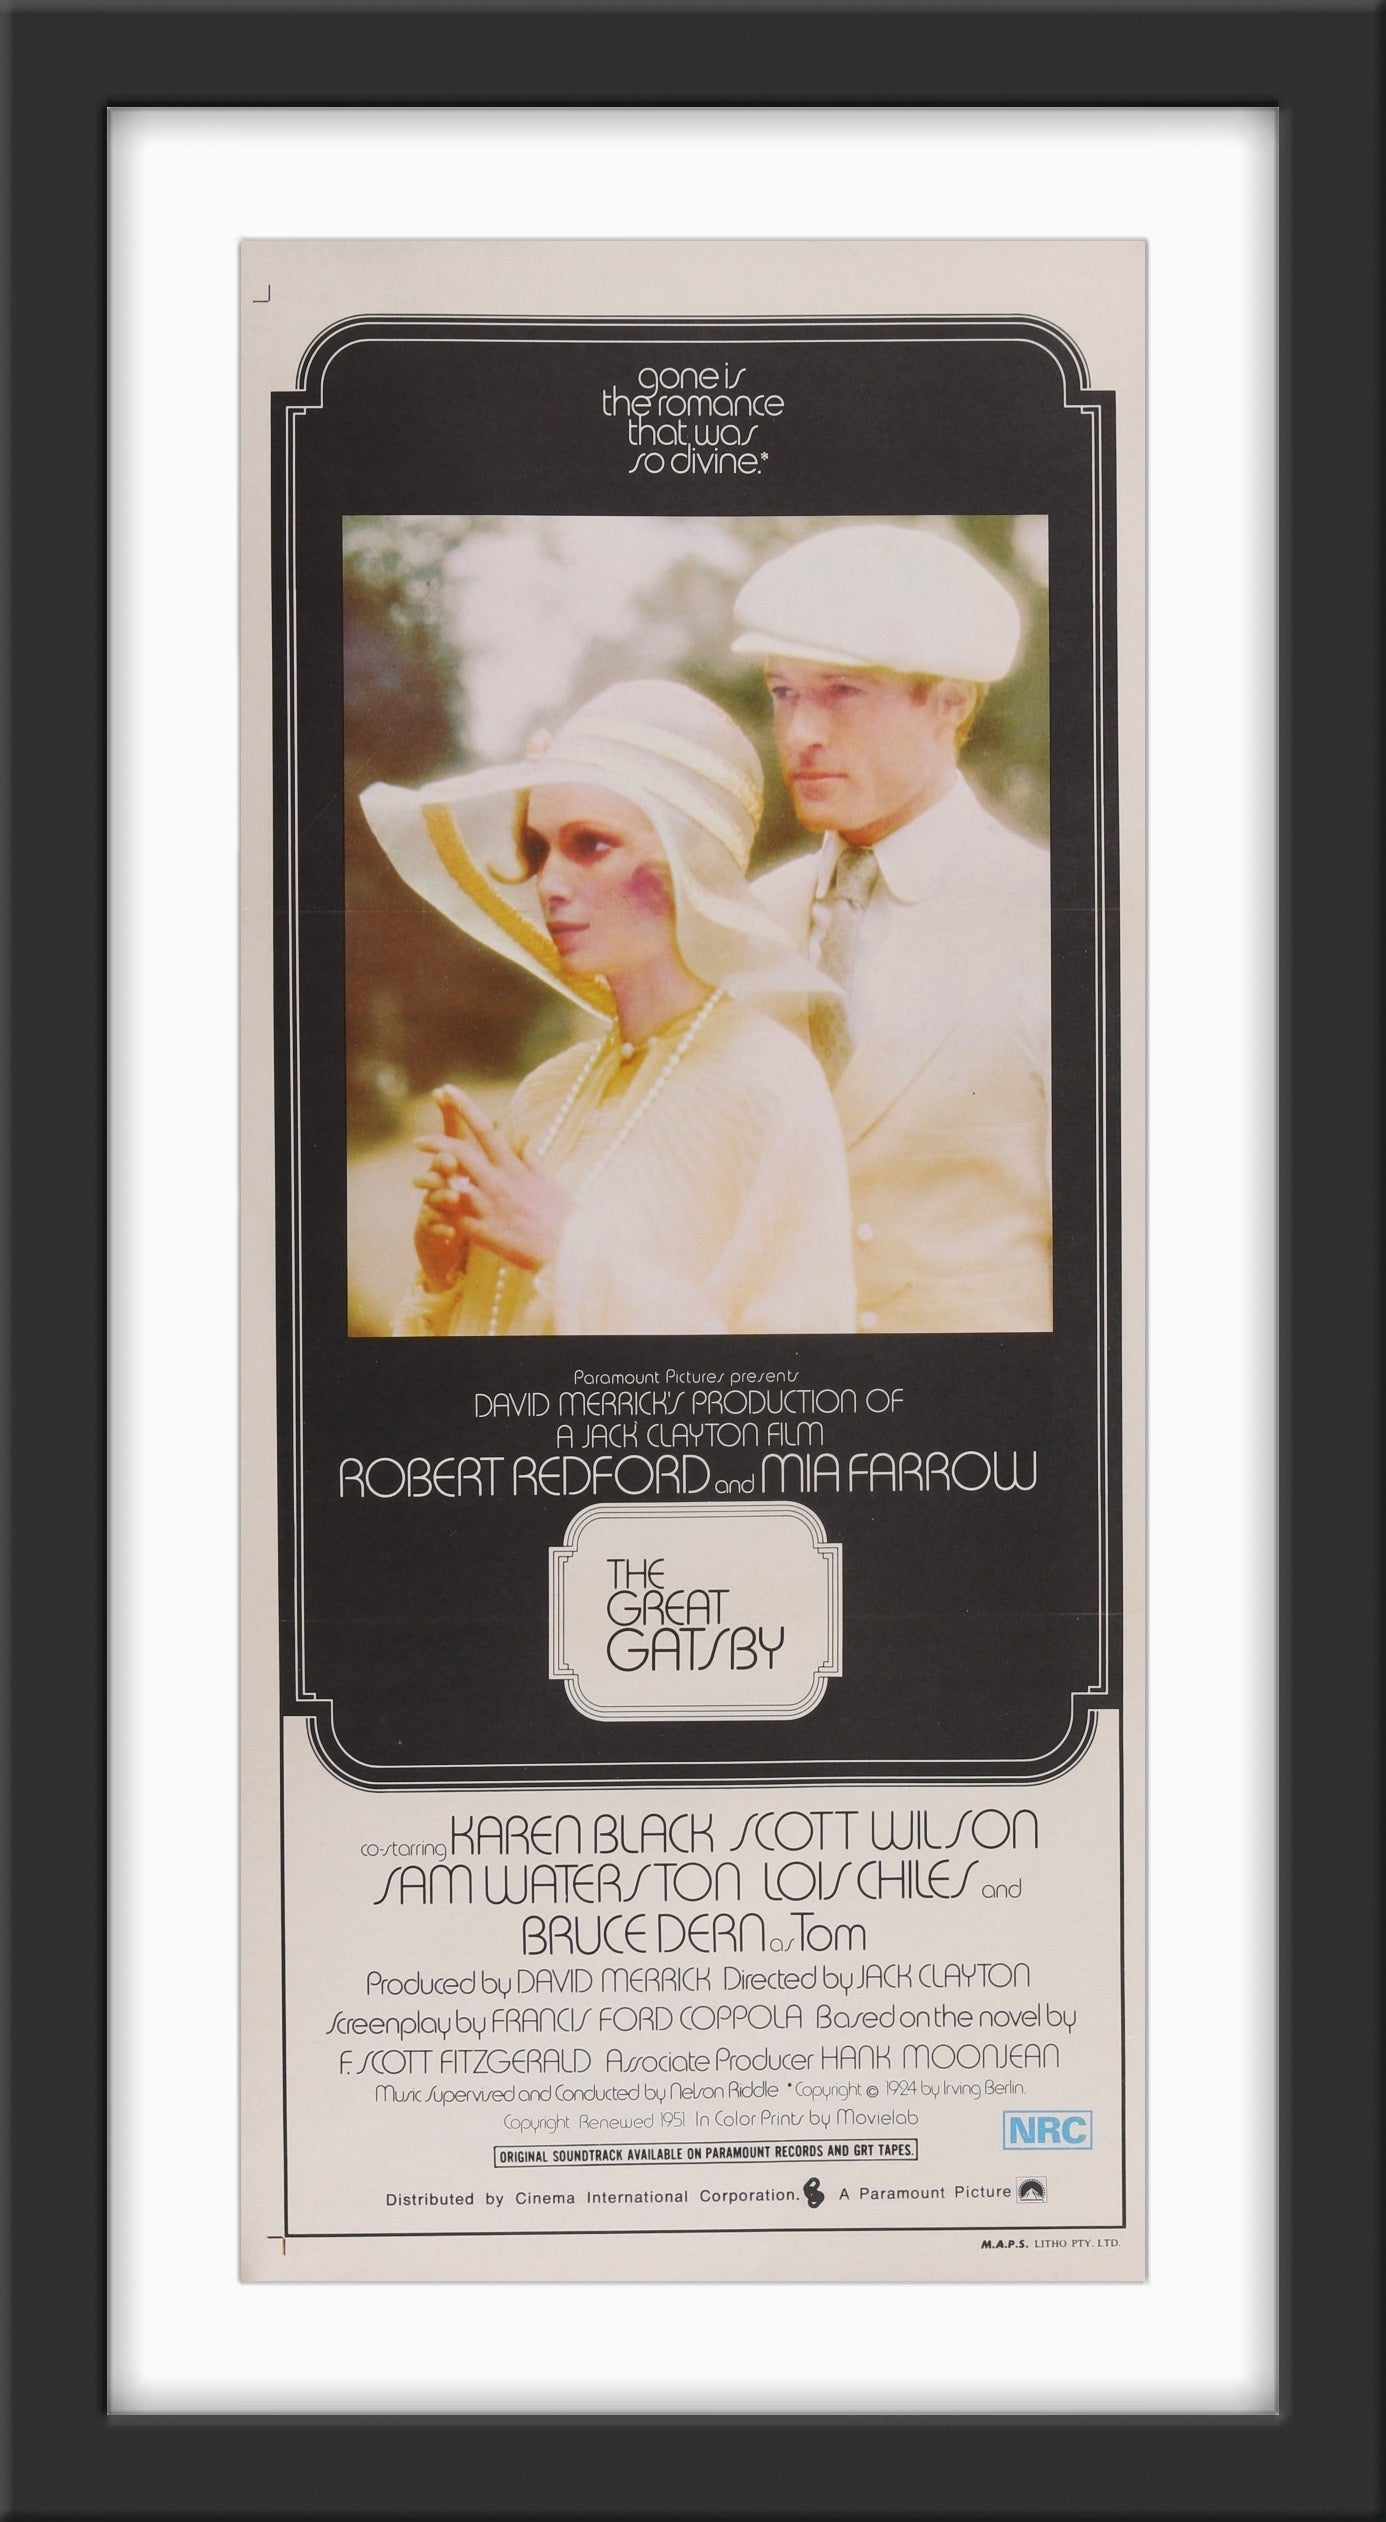 An original movie poster for the 1974 film The Great Gatsby